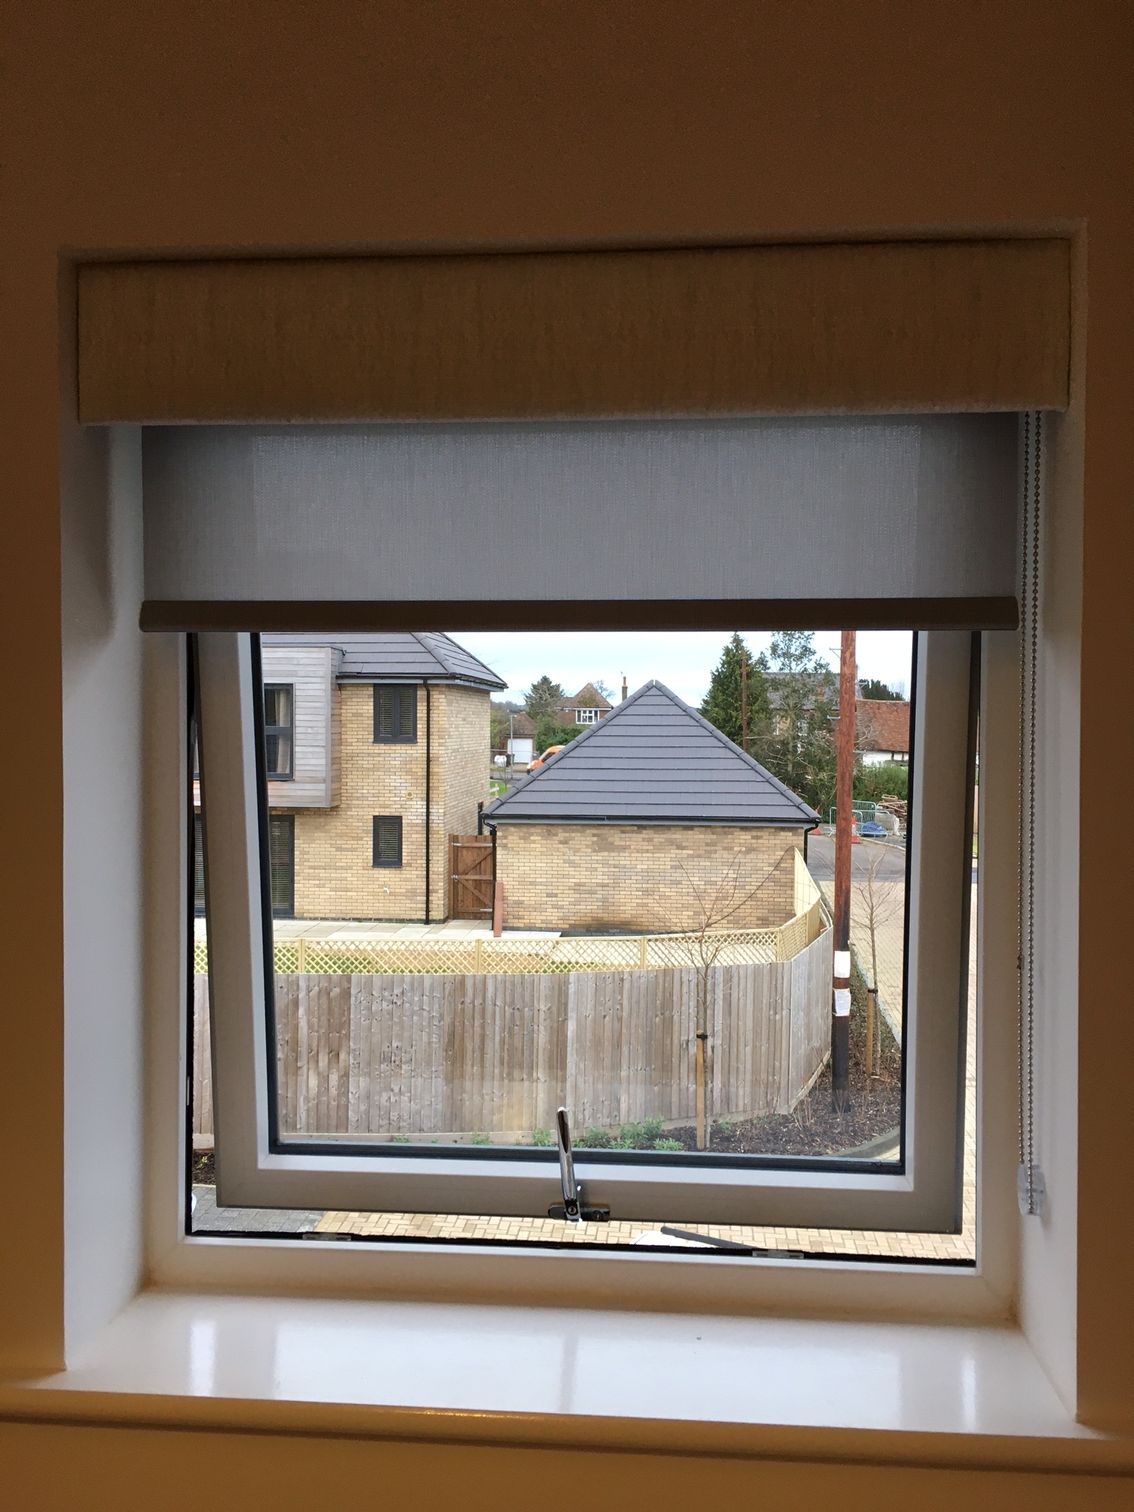 Roller Blind for a small window can be operated motorised or manual